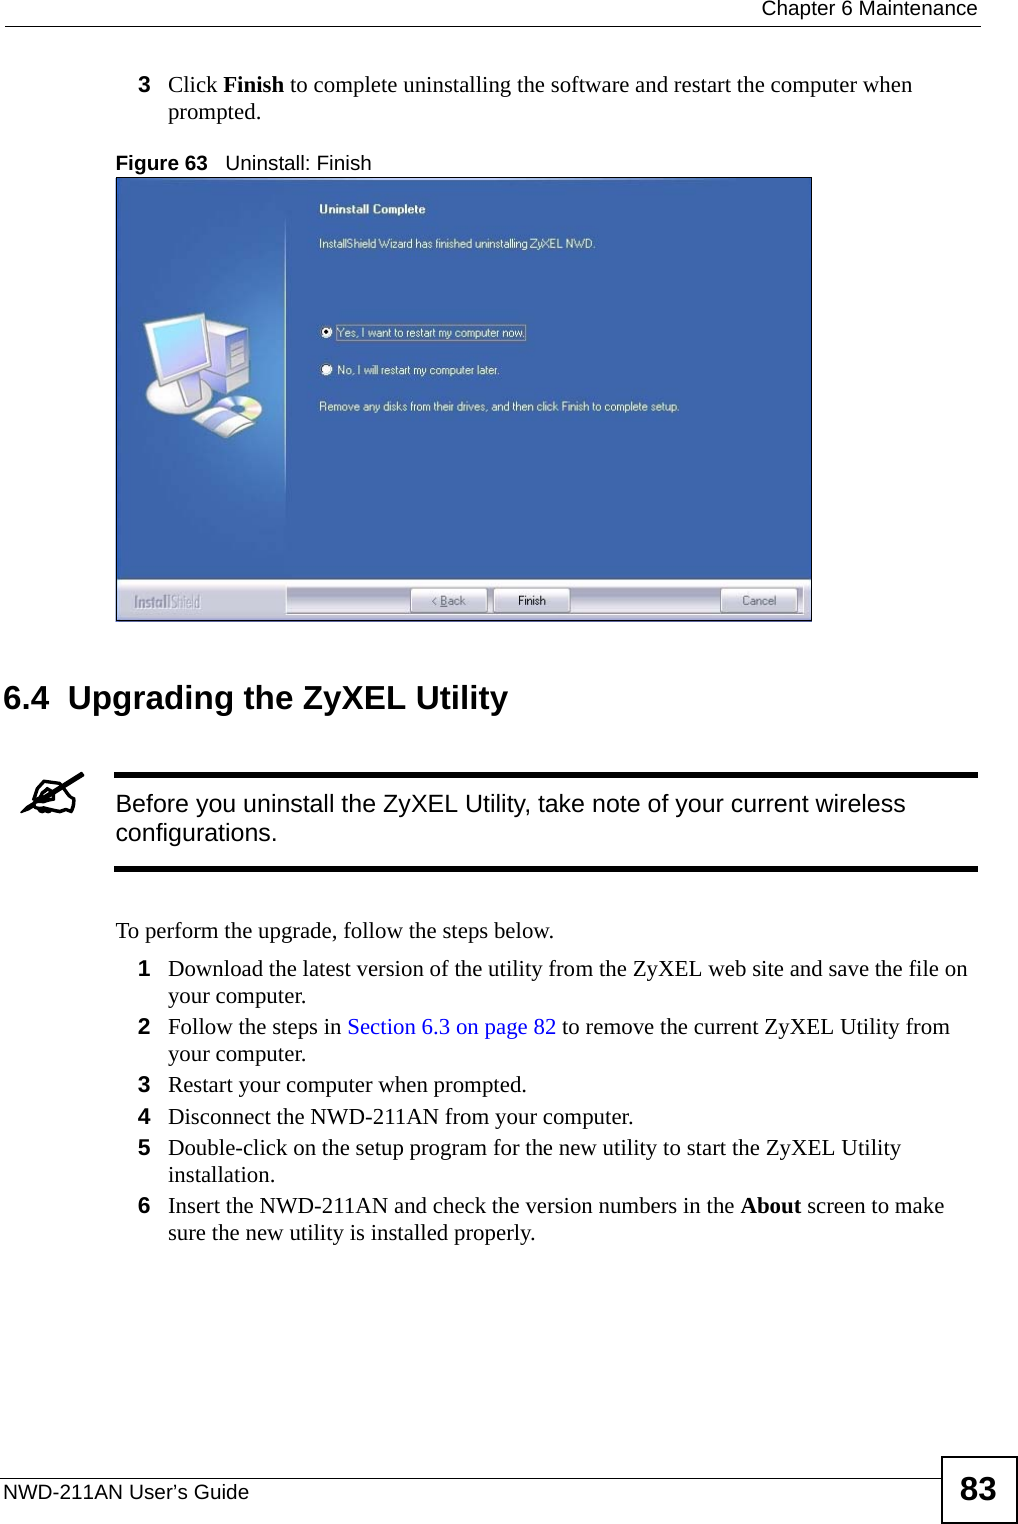  Chapter 6 MaintenanceNWD-211AN User’s Guide 833Click Finish to complete uninstalling the software and restart the computer when prompted.Figure 63   Uninstall: Finish 6.4  Upgrading the ZyXEL Utility&quot;Before you uninstall the ZyXEL Utility, take note of your current wireless configurations.To perform the upgrade, follow the steps below.1Download the latest version of the utility from the ZyXEL web site and save the file on your computer.2Follow the steps in Section 6.3 on page 82 to remove the current ZyXEL Utility from your computer.3Restart your computer when prompted.4Disconnect the NWD-211AN from your computer.5Double-click on the setup program for the new utility to start the ZyXEL Utility installation.6Insert the NWD-211AN and check the version numbers in the About screen to make sure the new utility is installed properly.